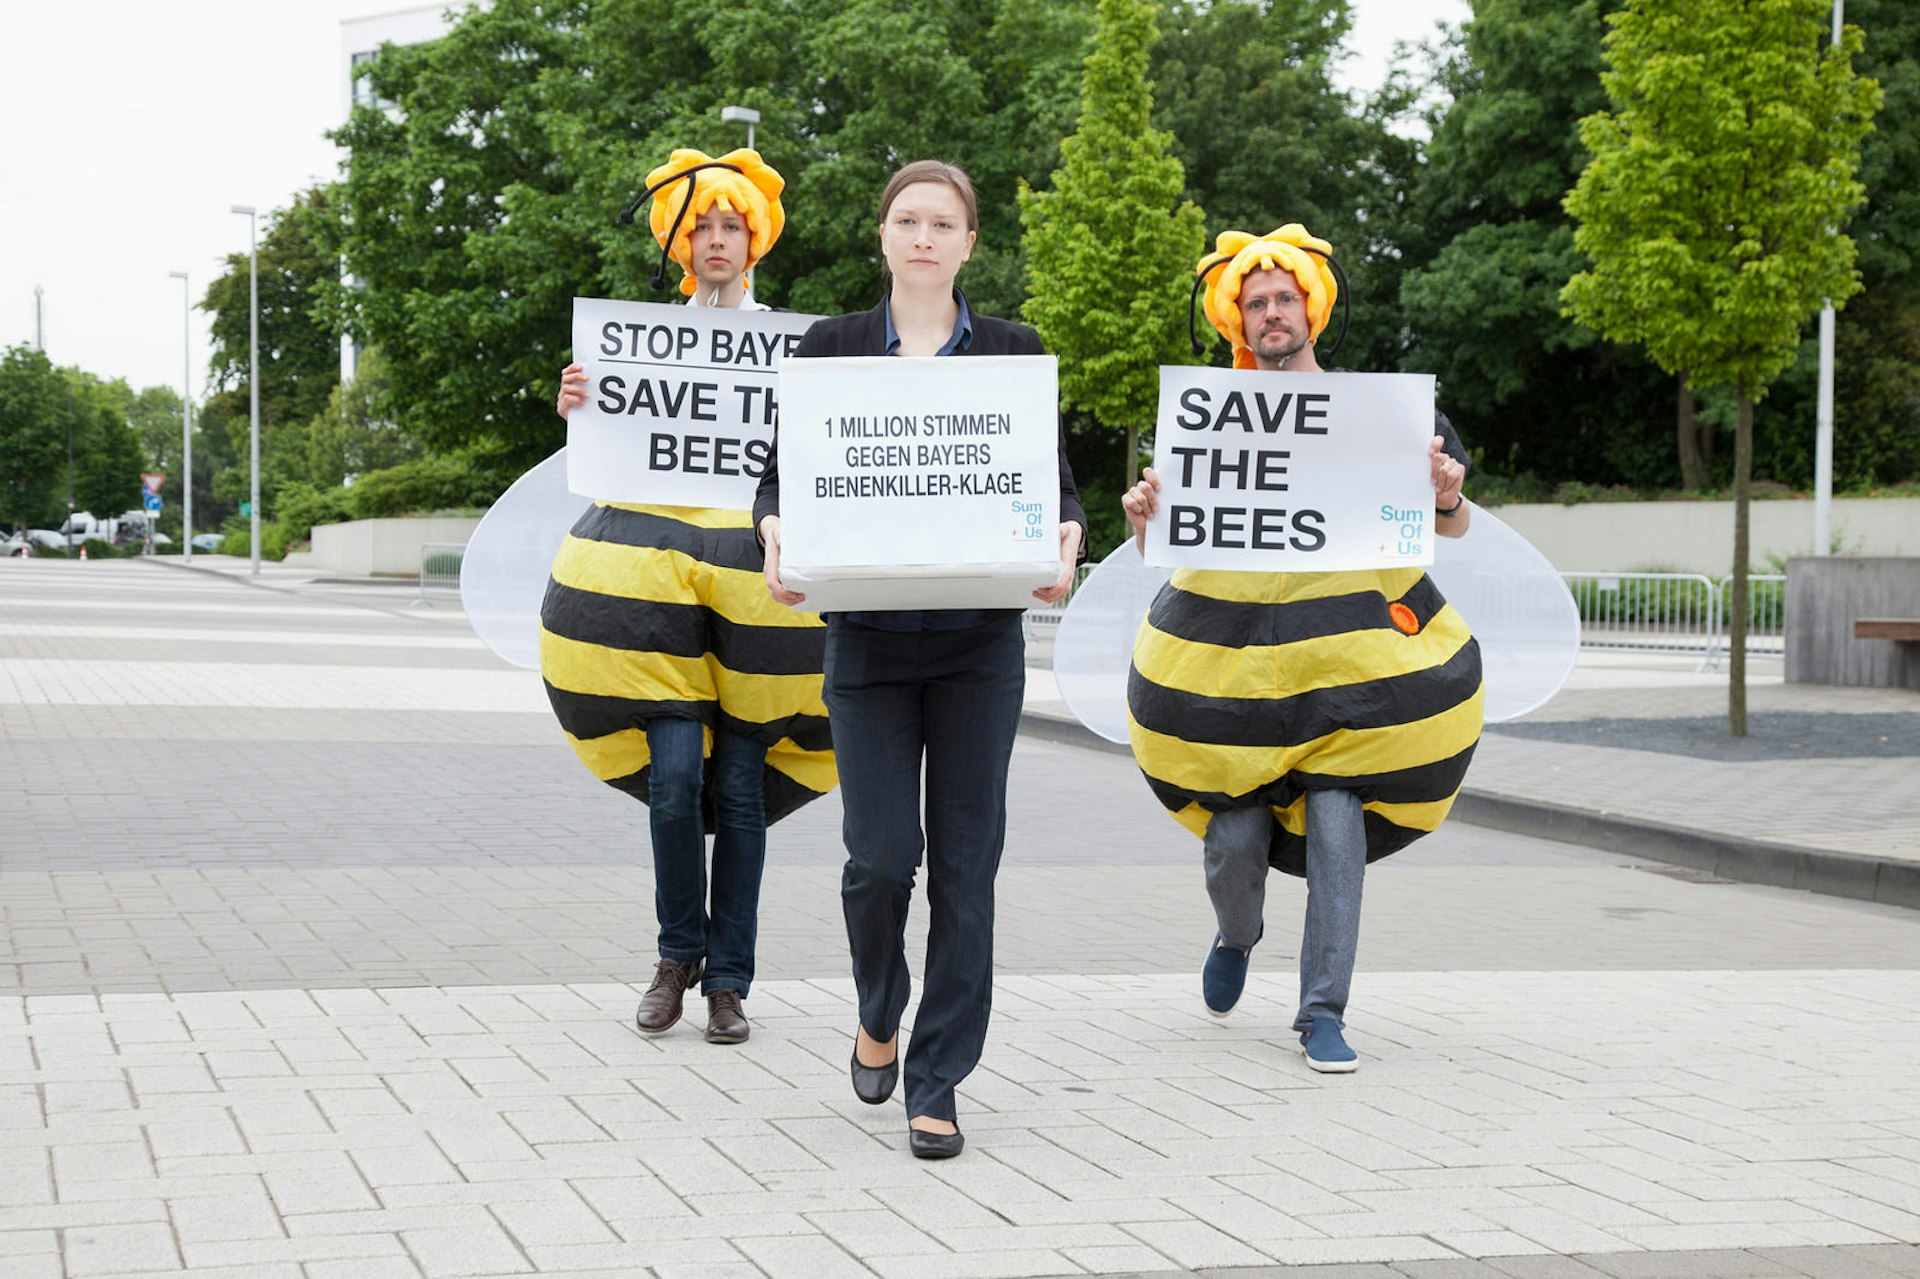 Activists threatened with legal action for defending bees